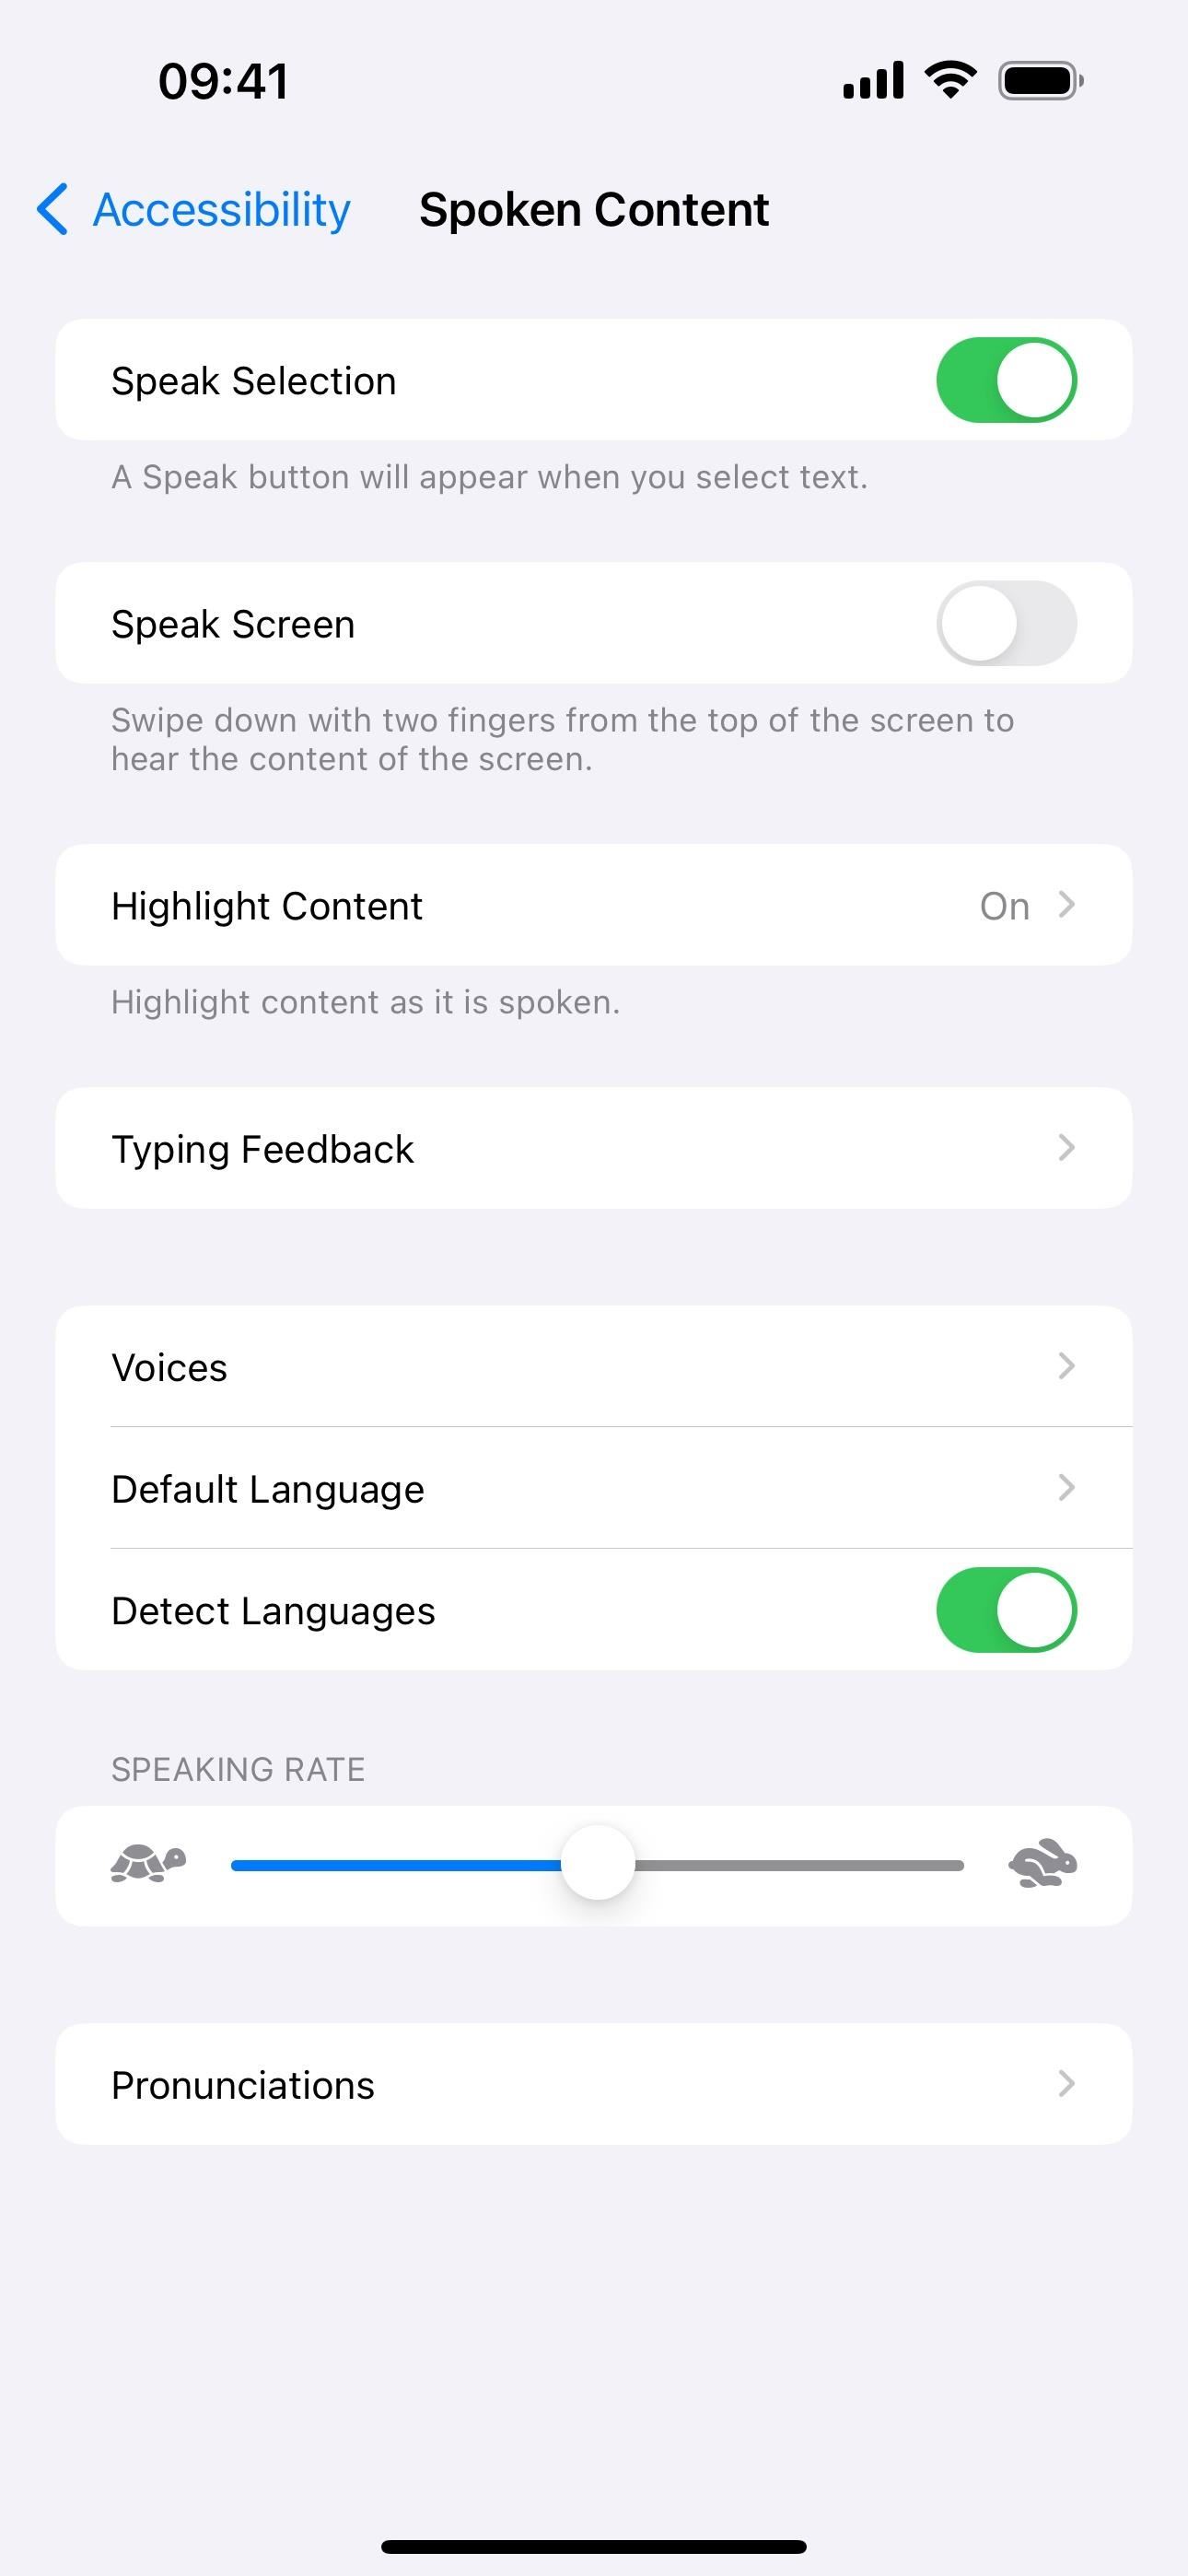 Unlock Your iPhone's Many Hidden Text-to-Speech Features to Make It Read Virtually Any On-Screen Content